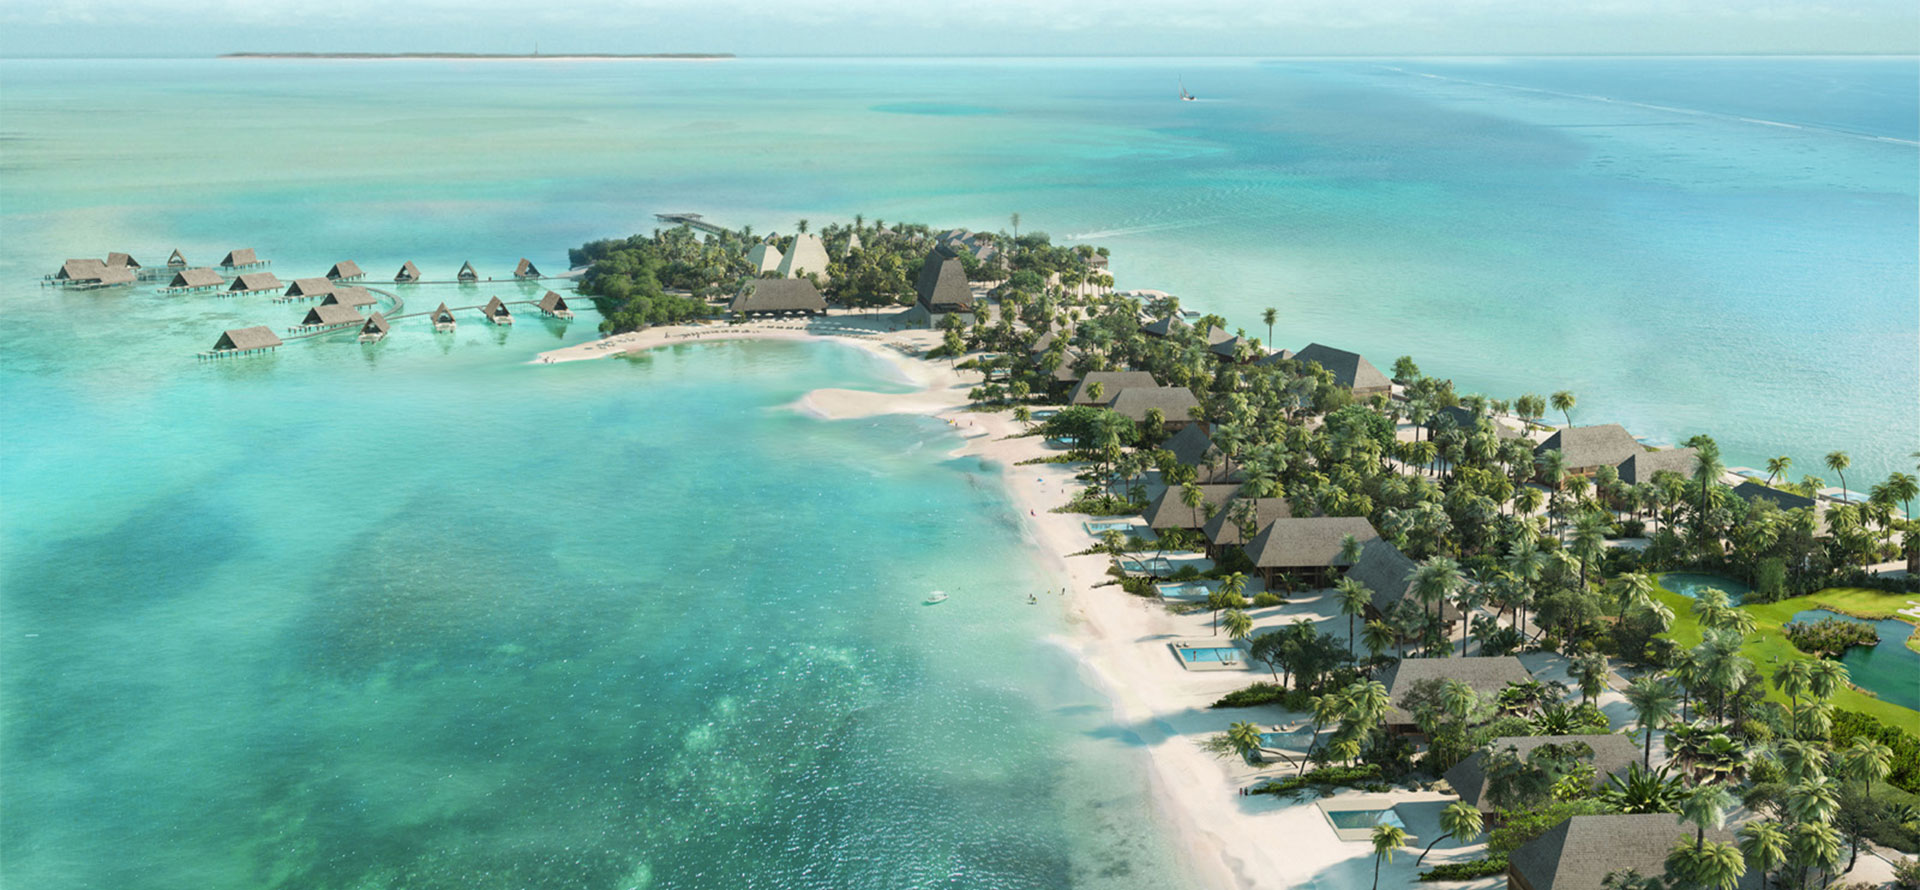 Belize overwater bungalows and island.